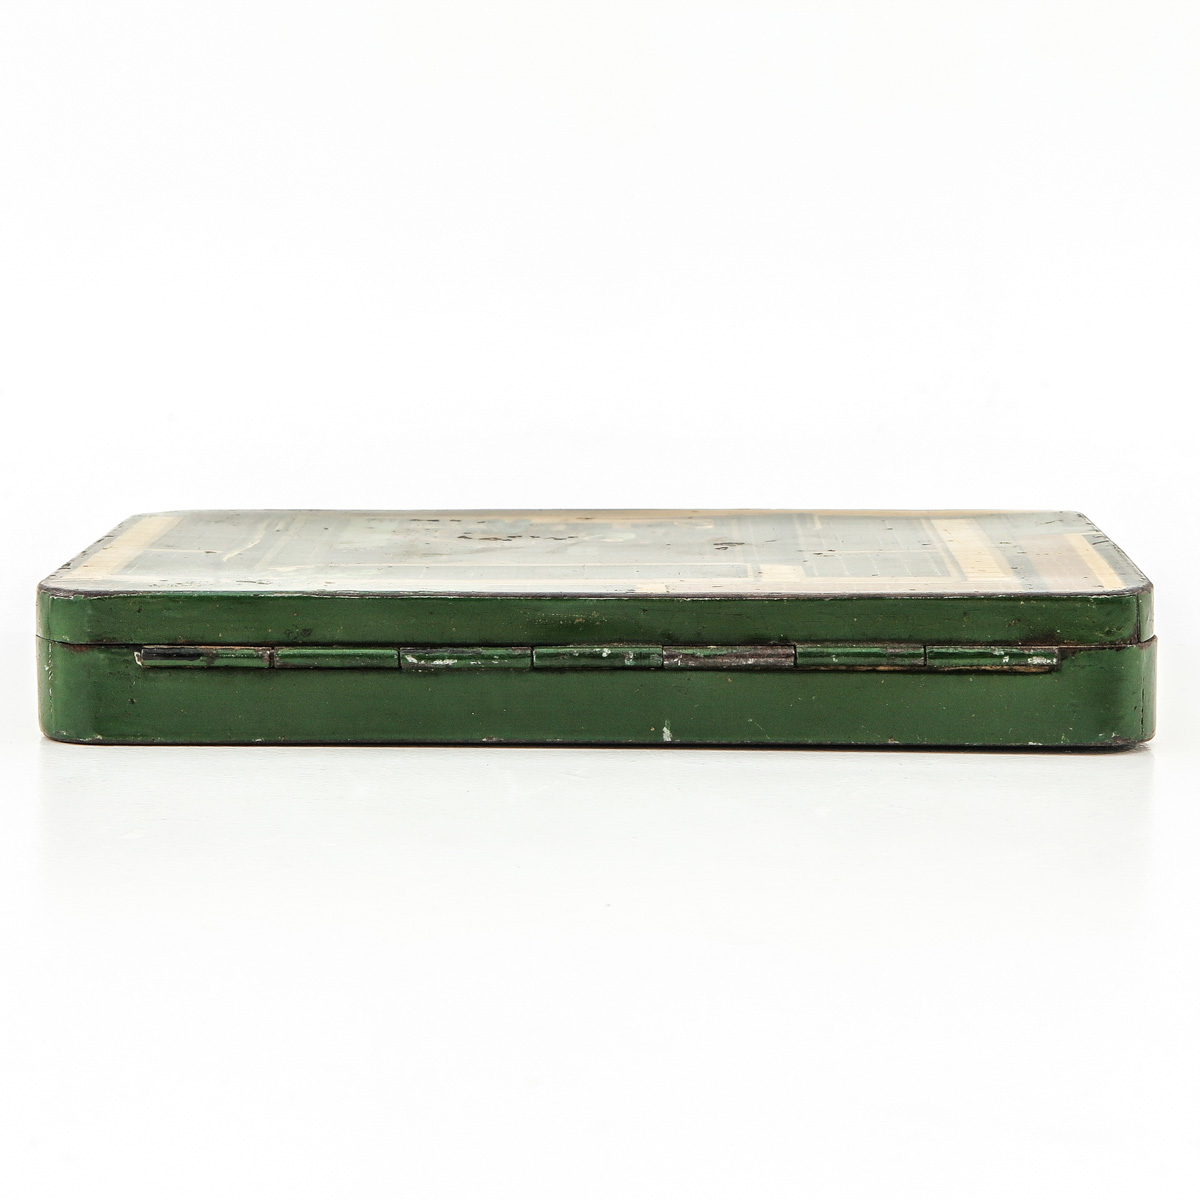 A 19th Century Painted Tin Tobacco Box - Image 4 of 9